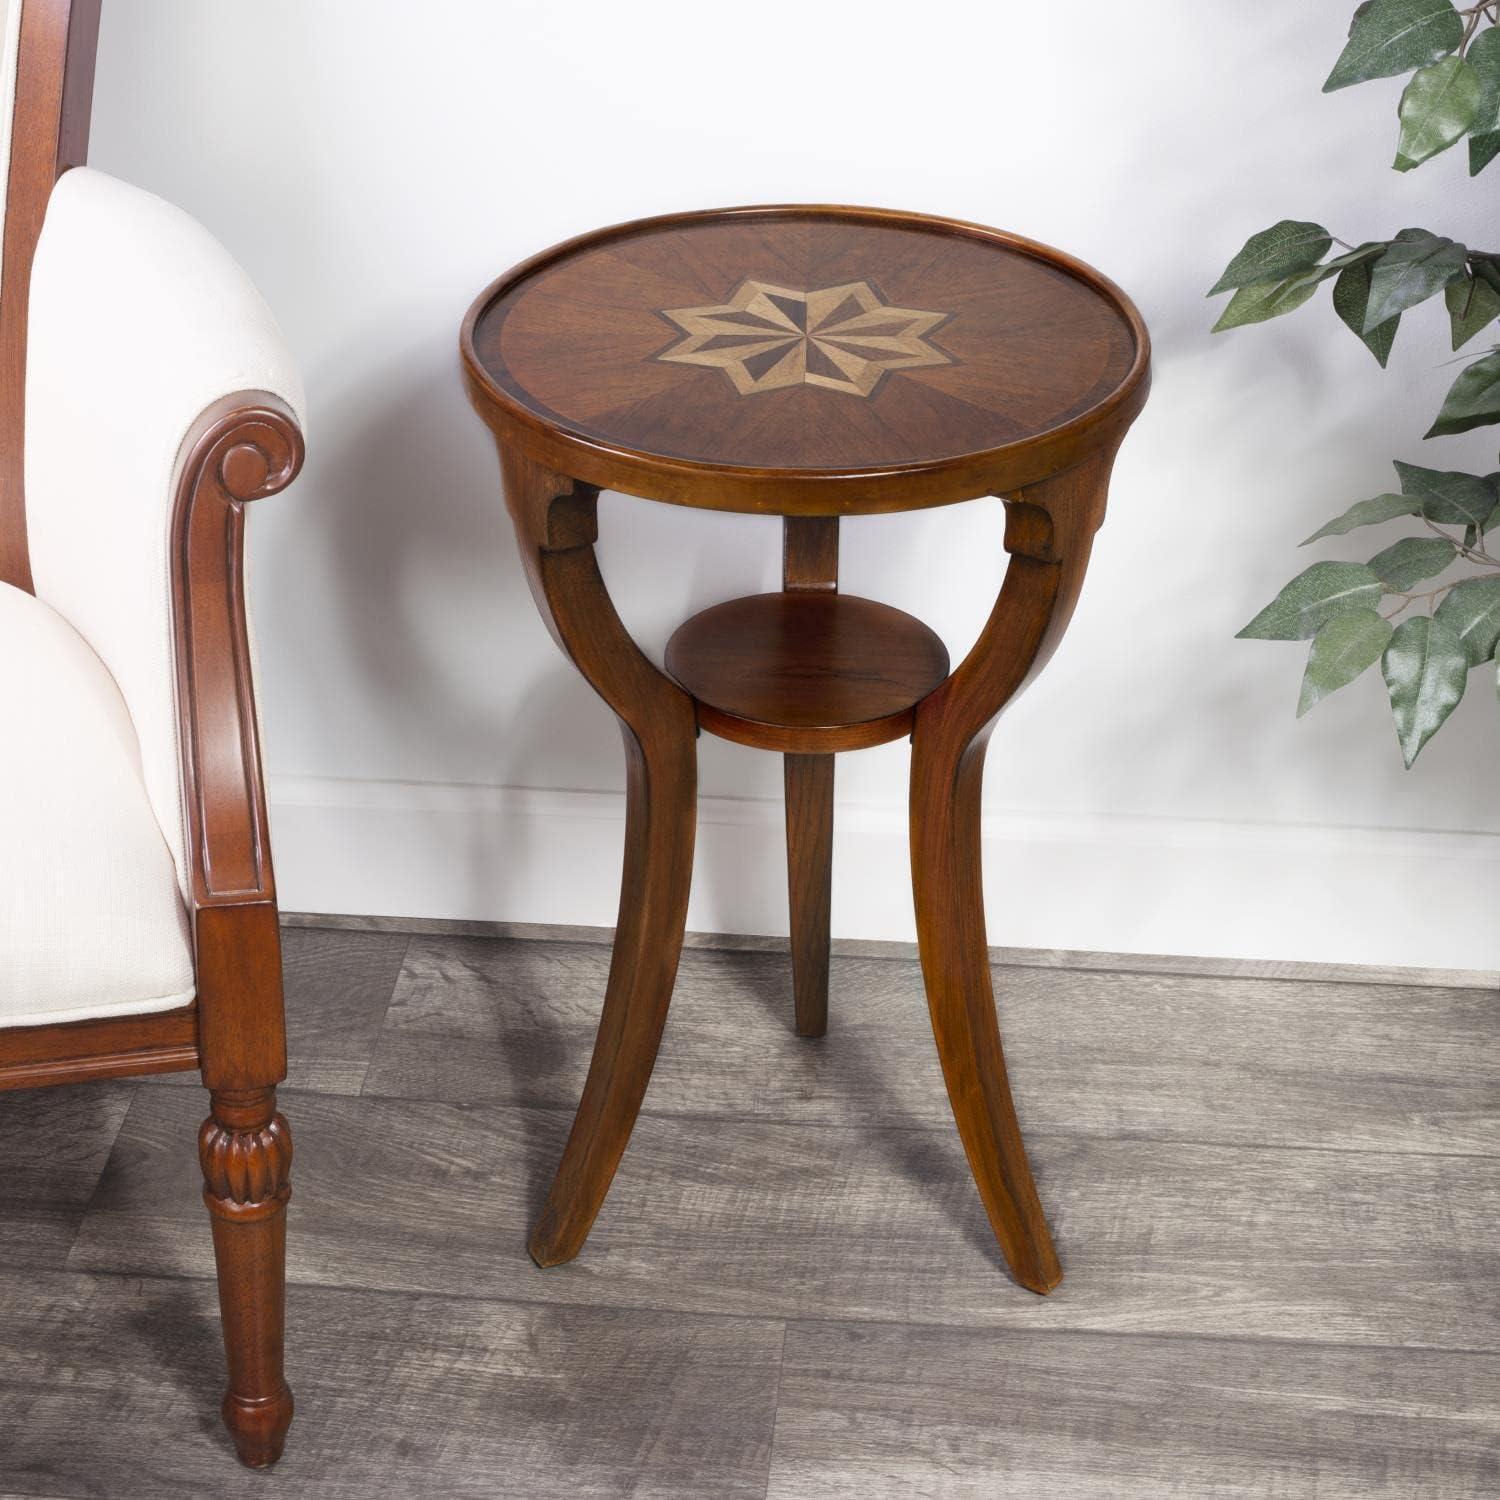 Dalton Cherry Brown Round Accent Table with Splayed Legs